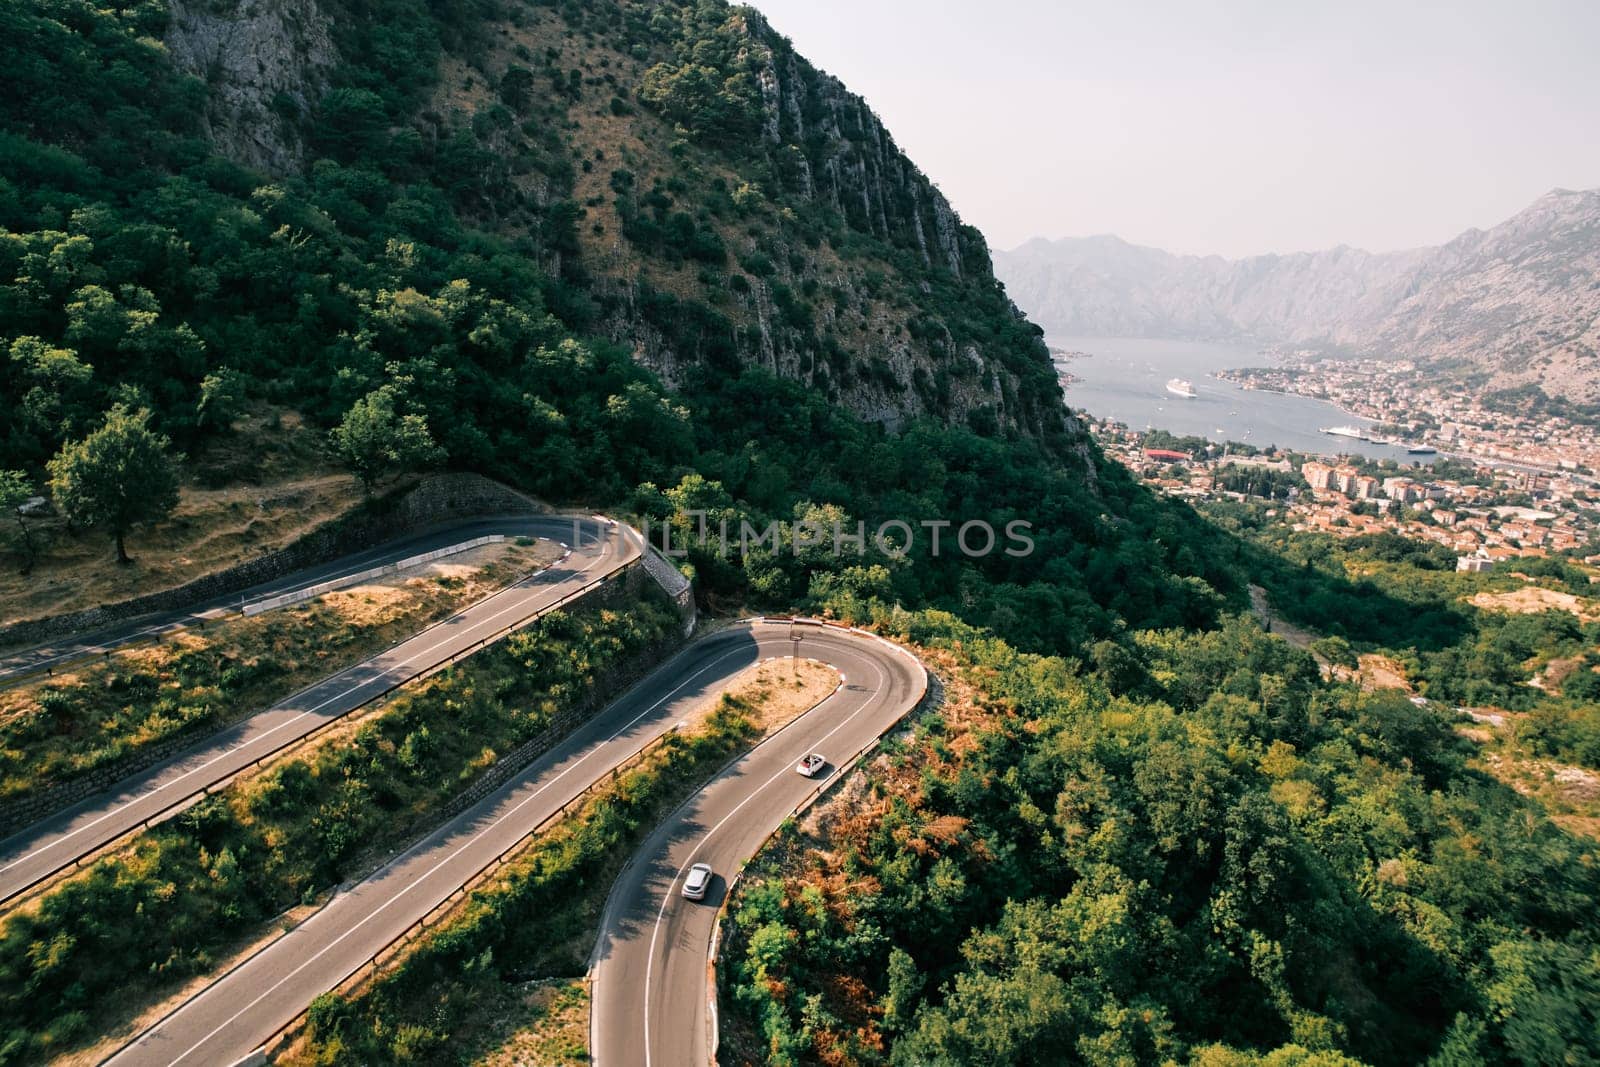 Cars drive along a serpentine road in the green mountains above the Bay of Kotor. Montenegro by Nadtochiy